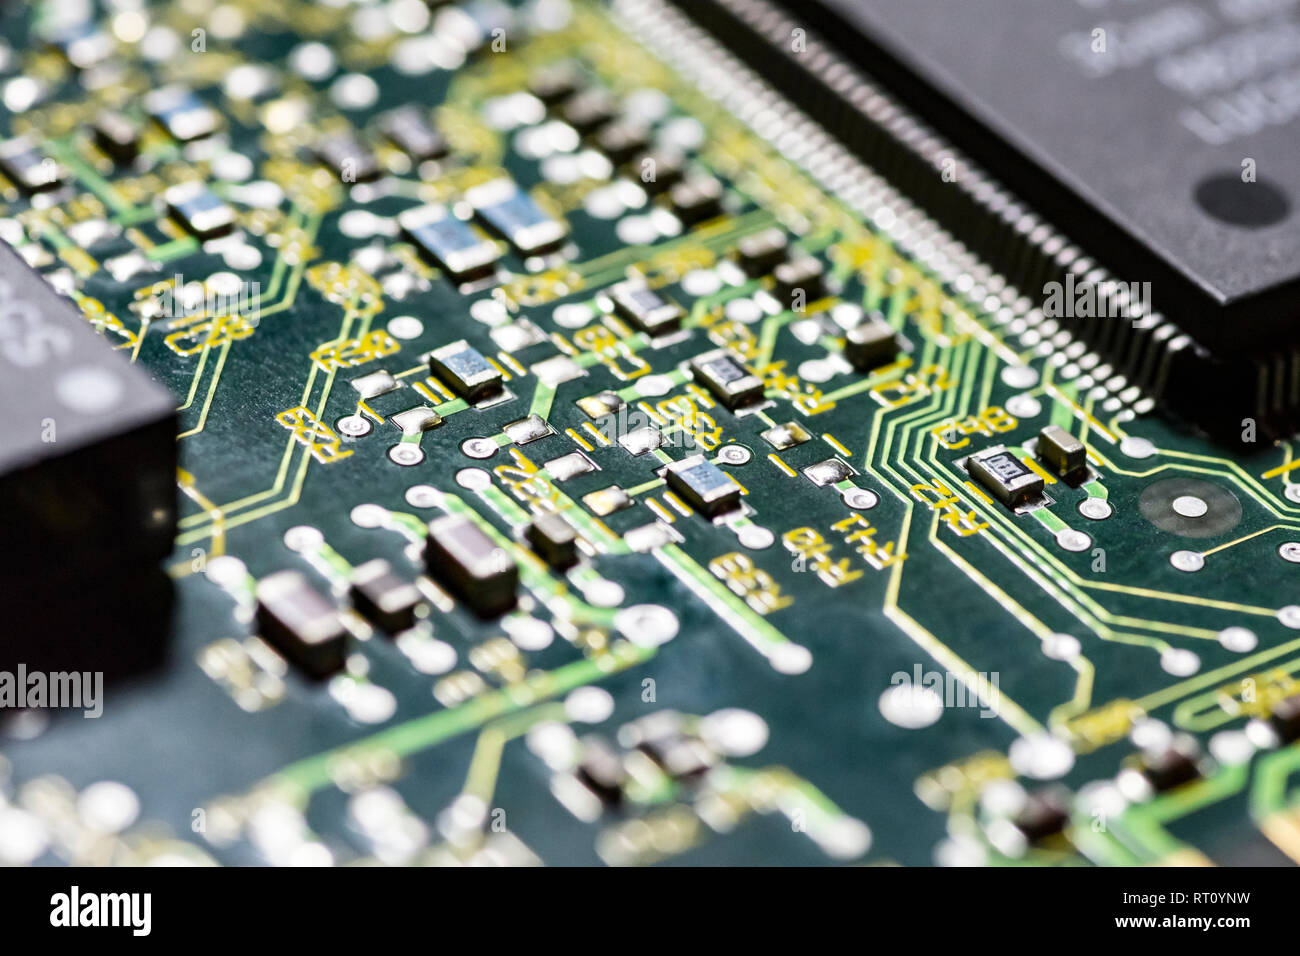 microchips and circuits on a board Stock Photo